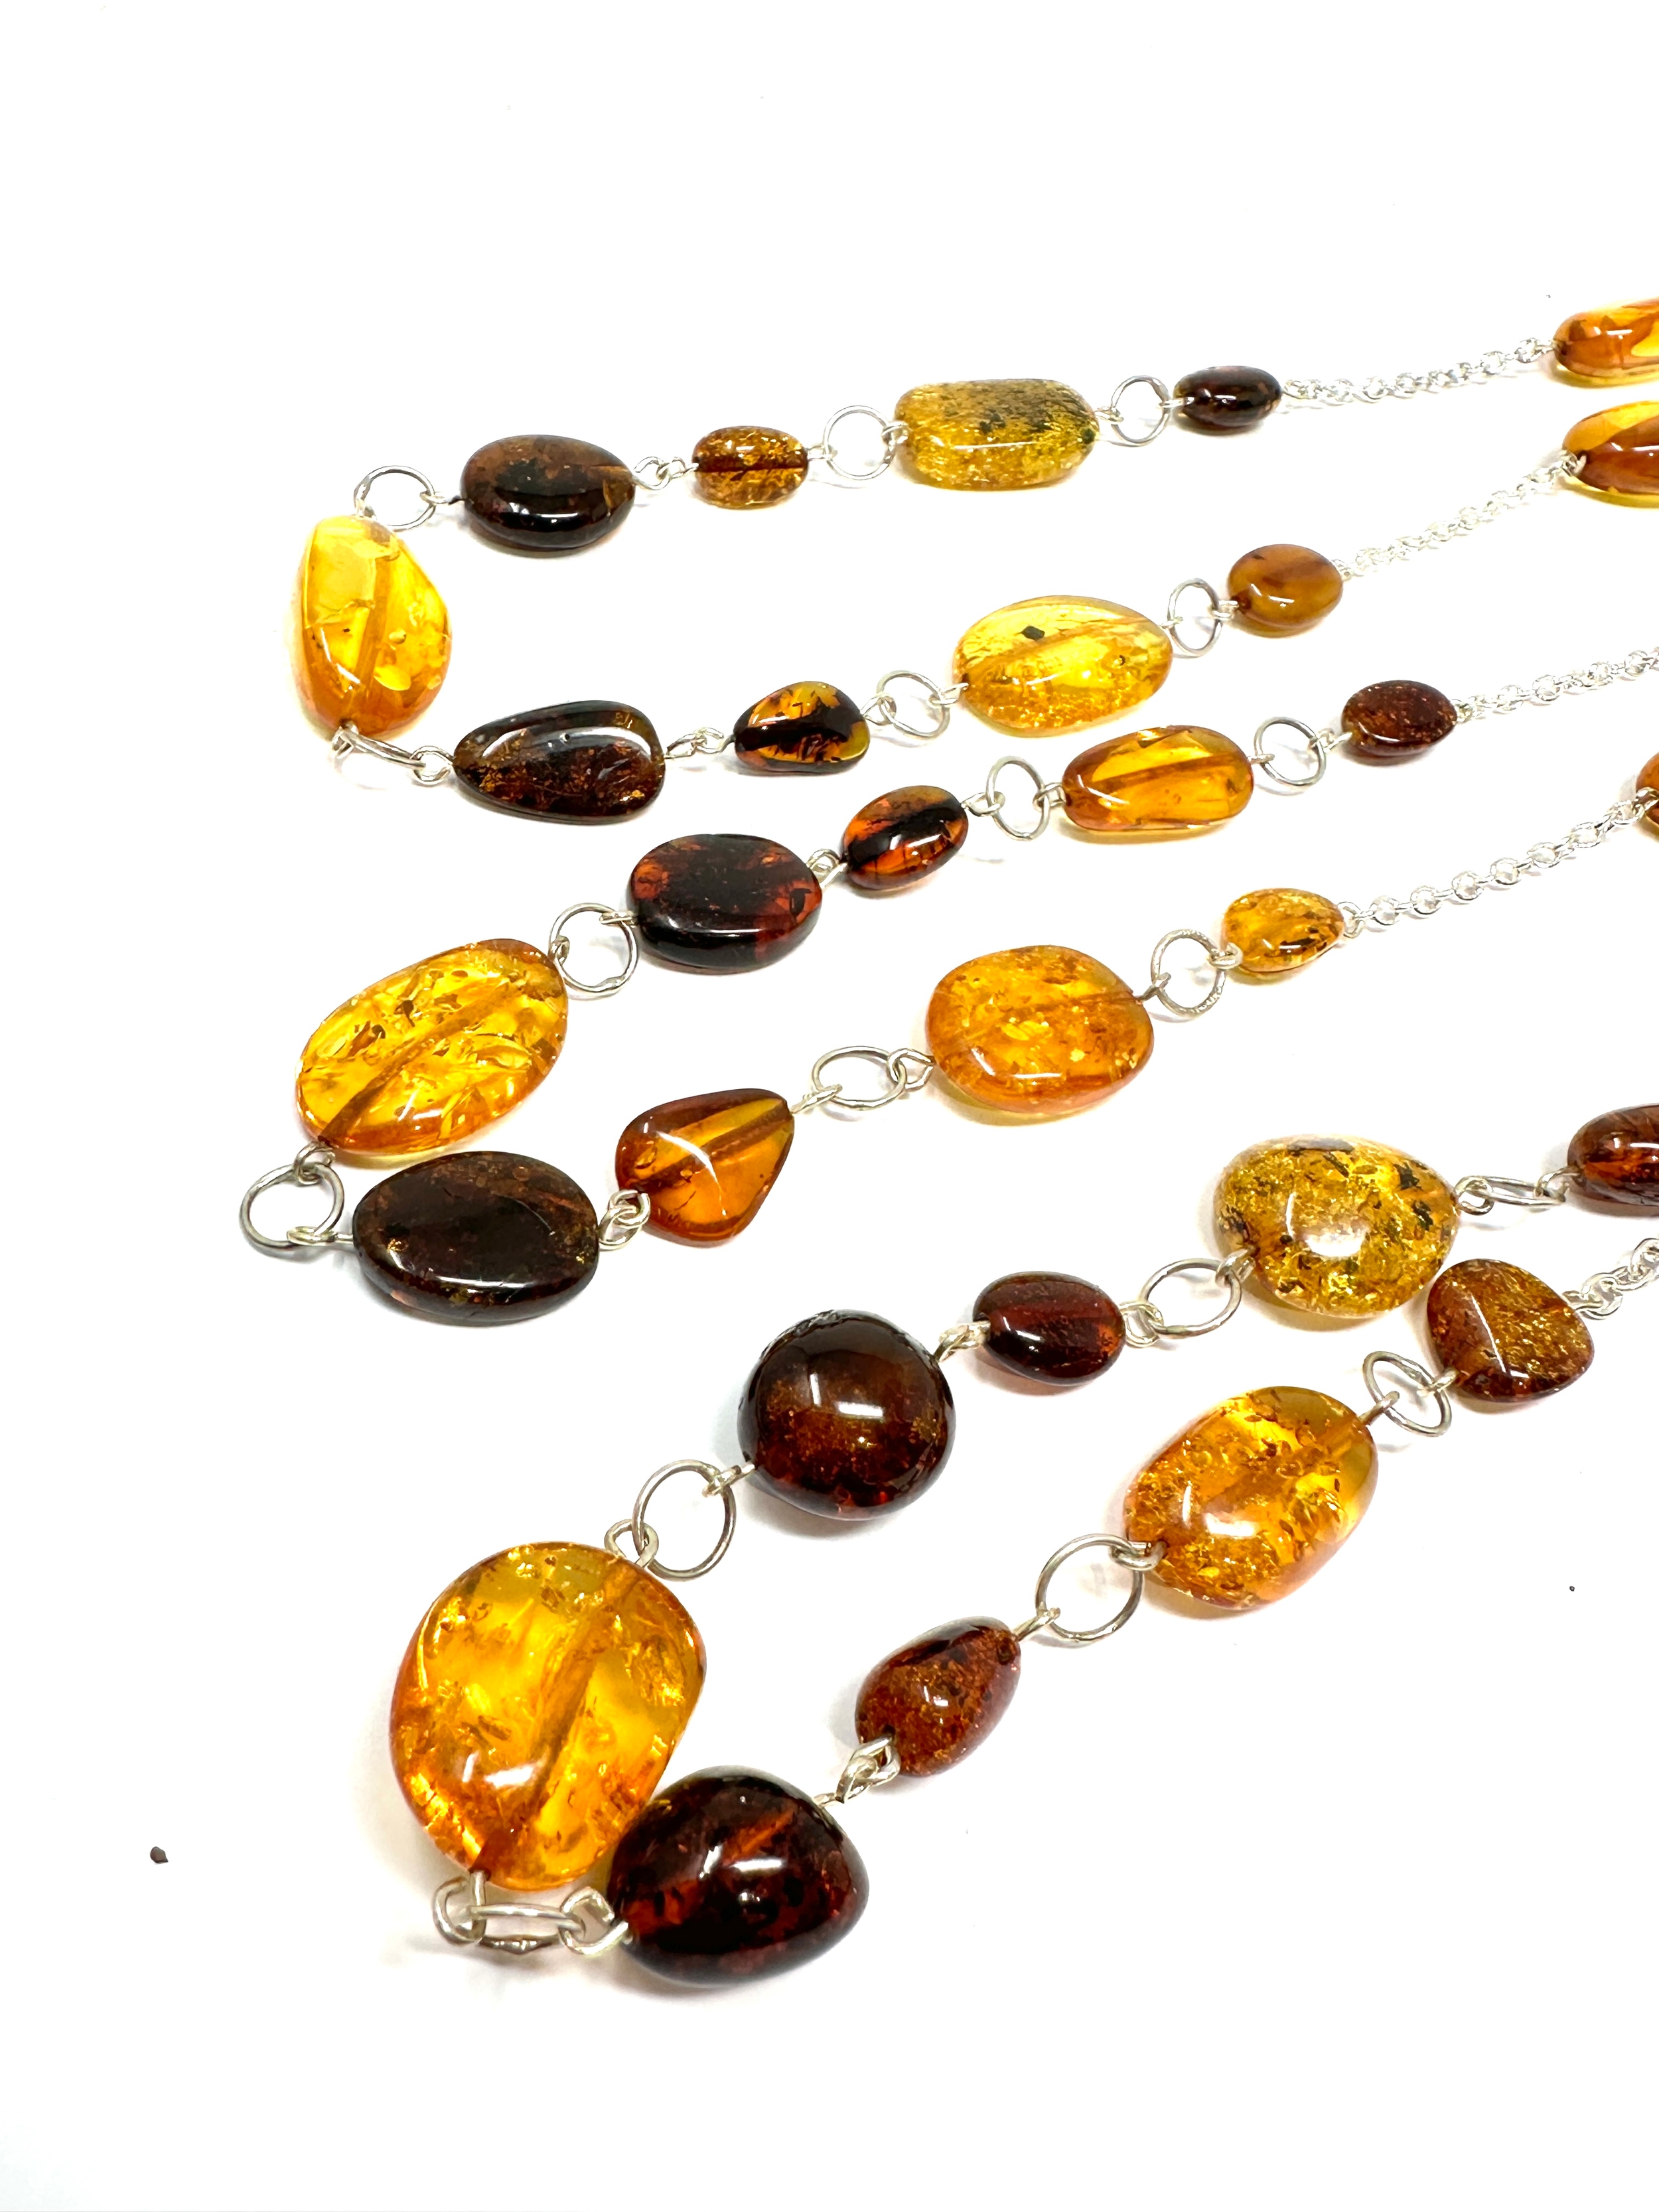 3 silver & amber necklaces weight 48g - Image 2 of 3